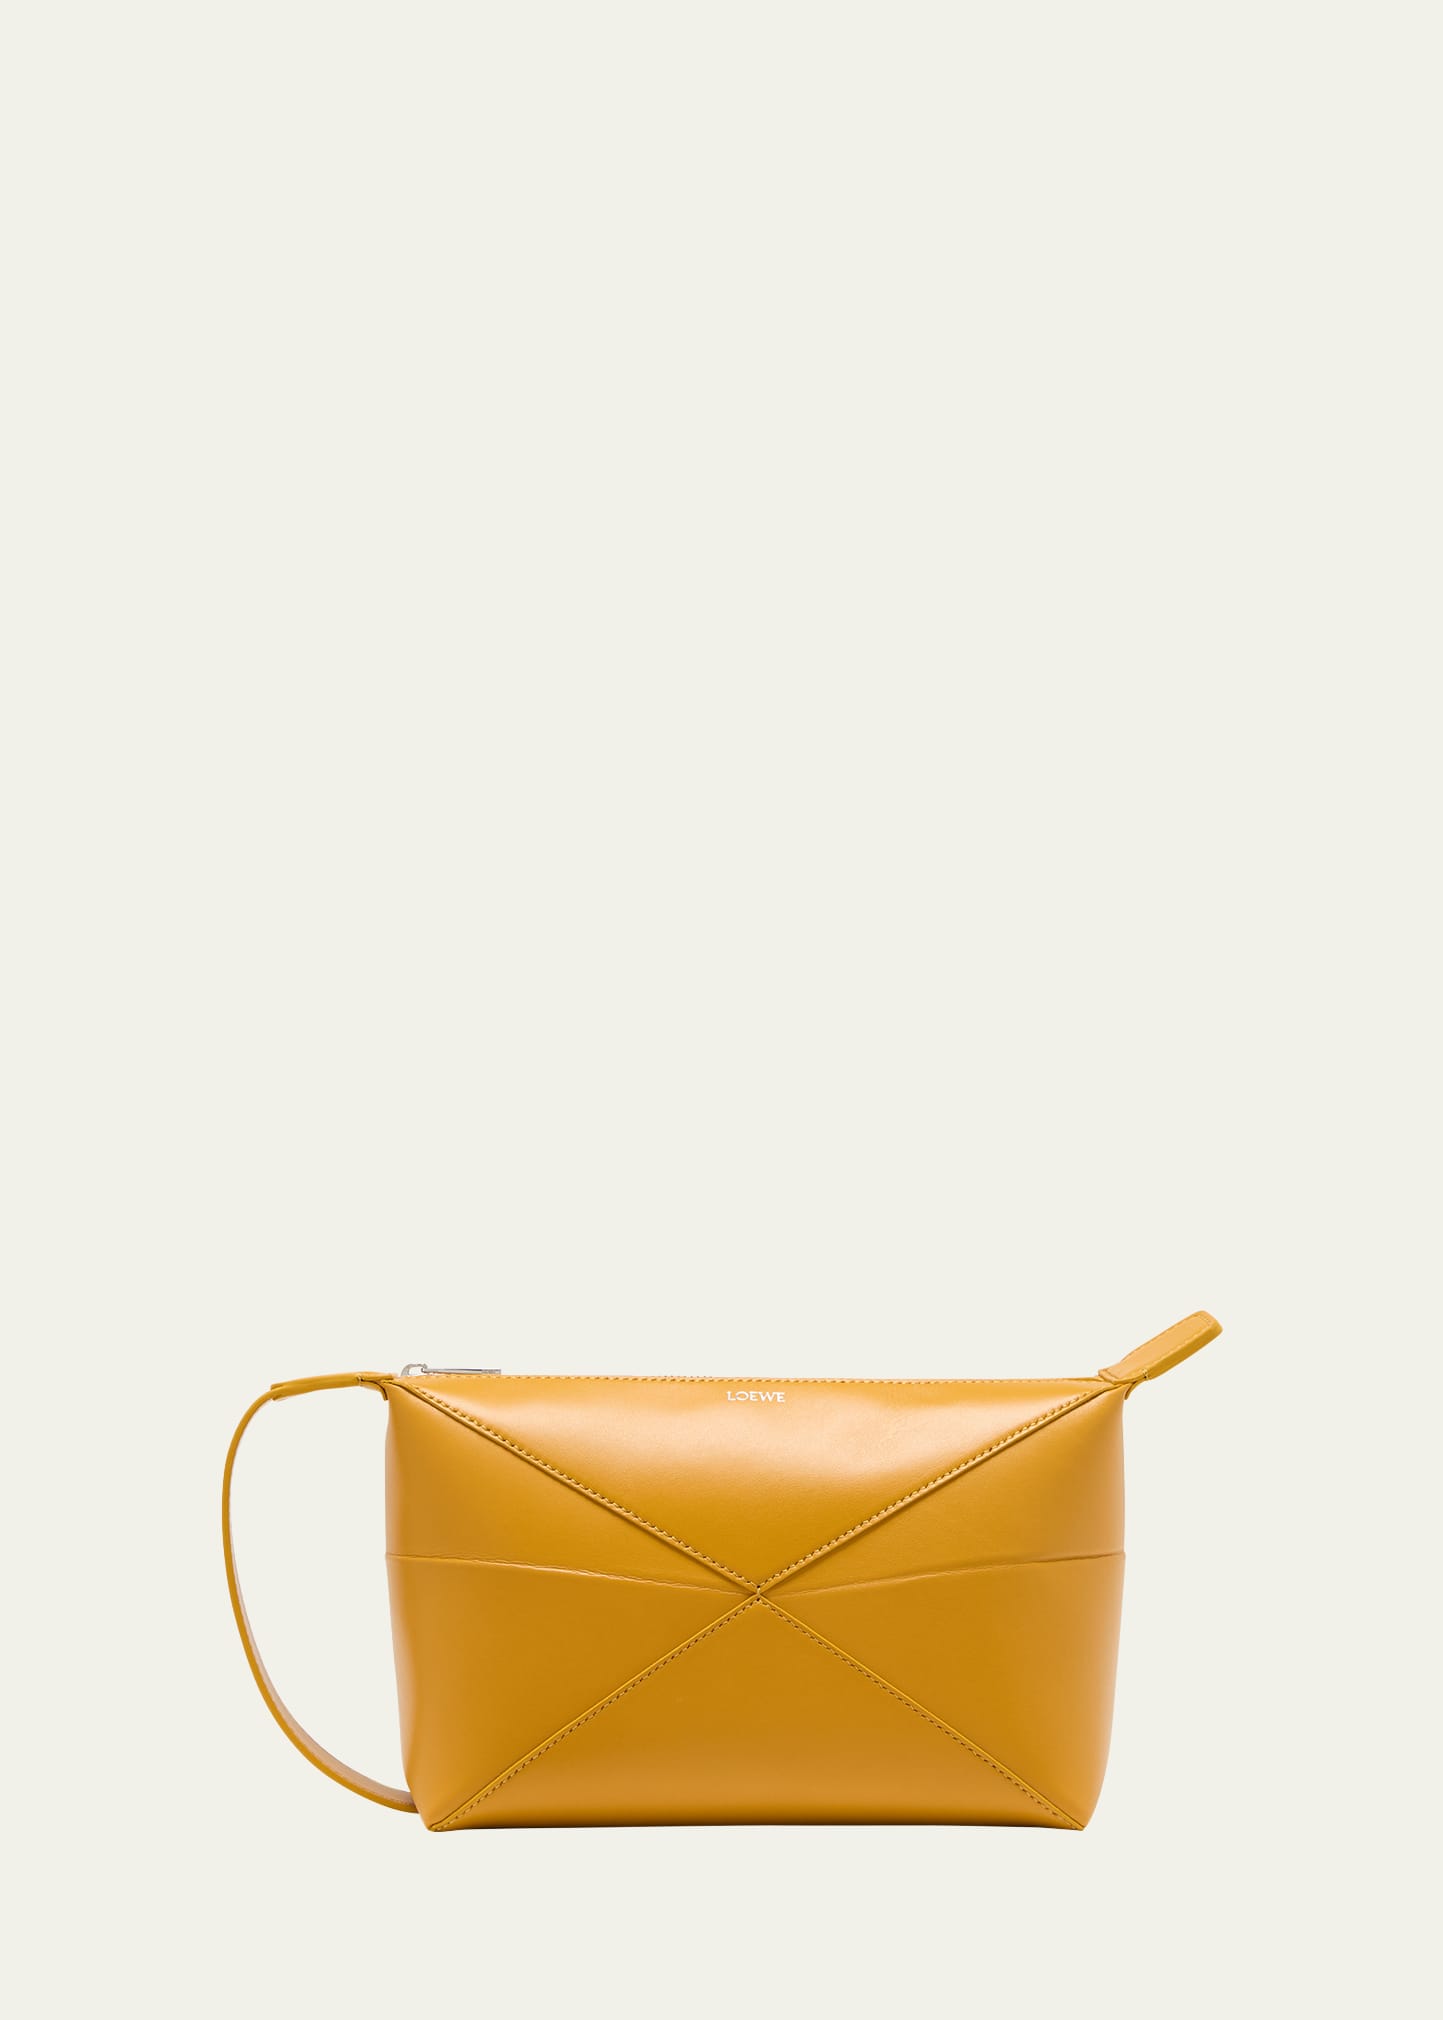 Loewe Men's Puzzle Fold Leather Toiletry Bag In Sunflower